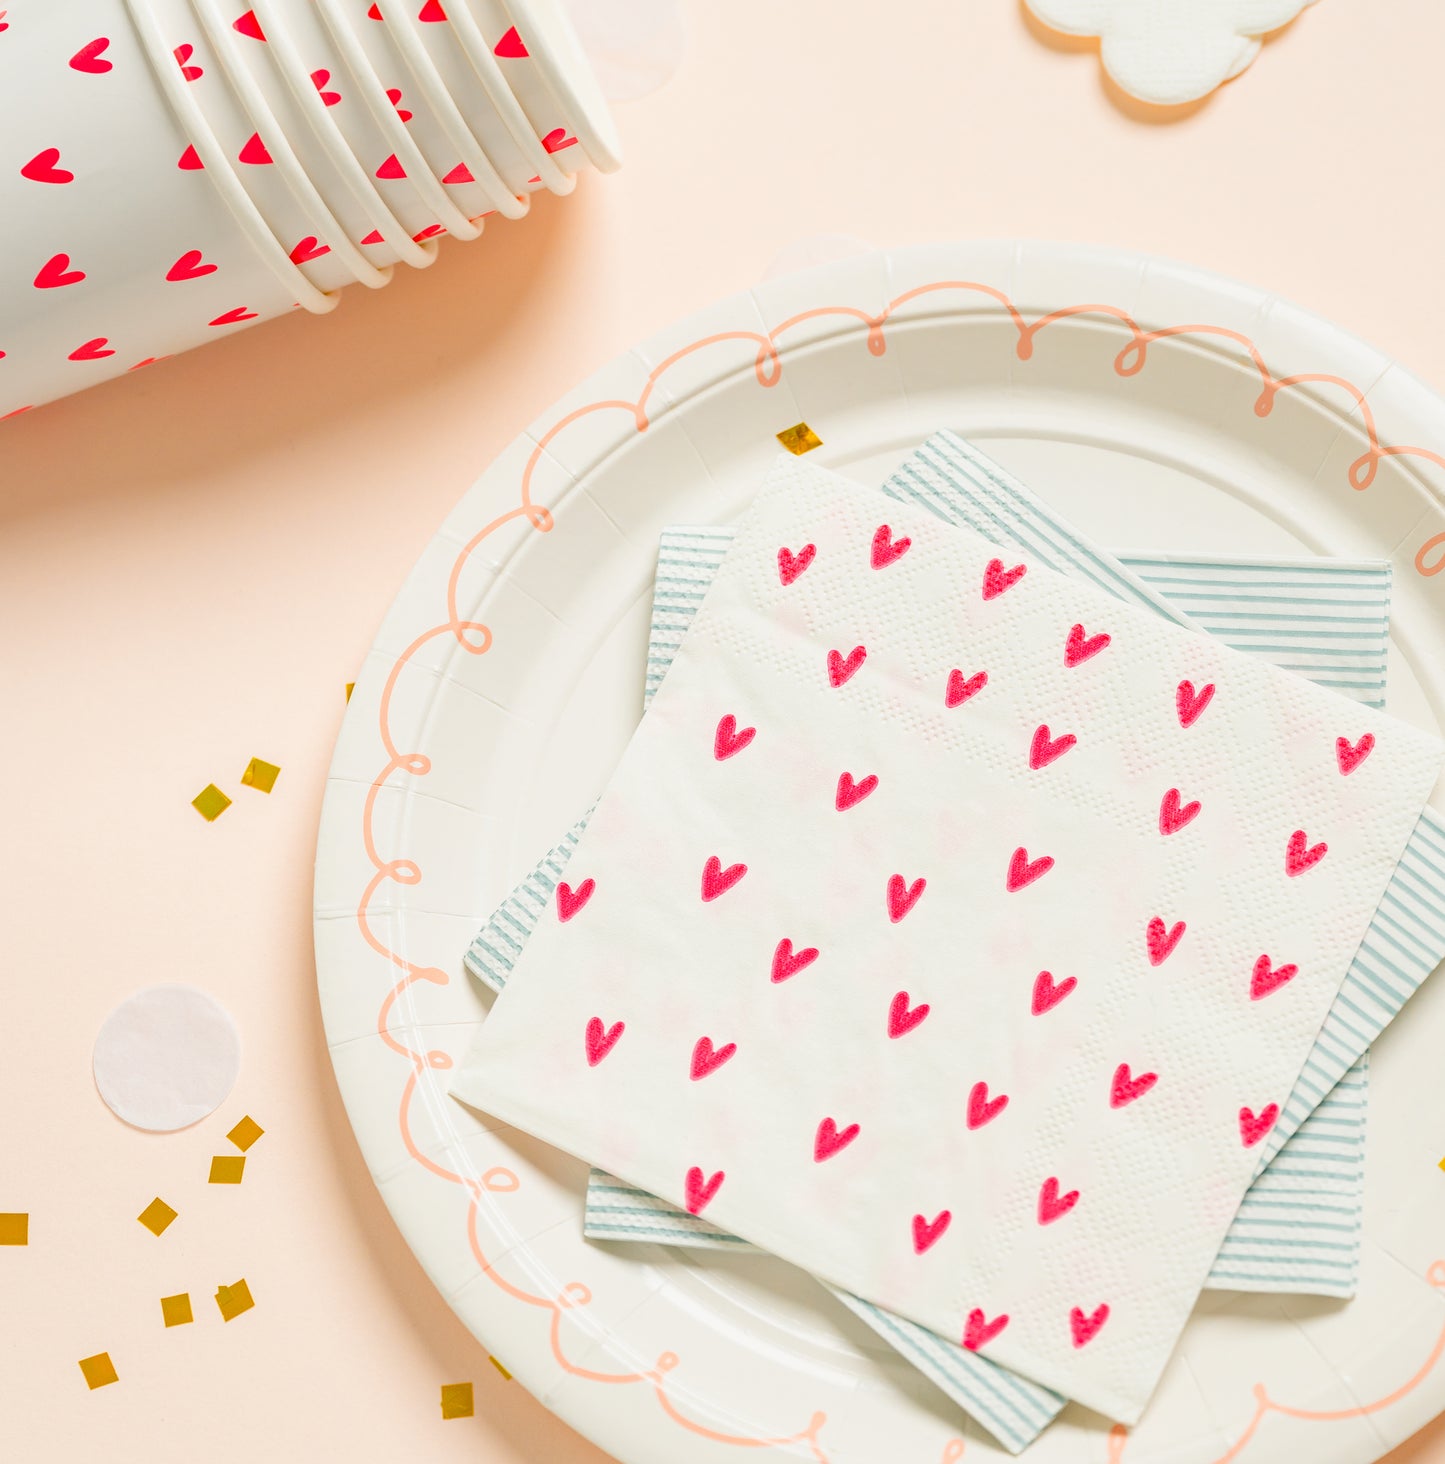 neon pink heart cups and napkin mixed with blue and pink patterns